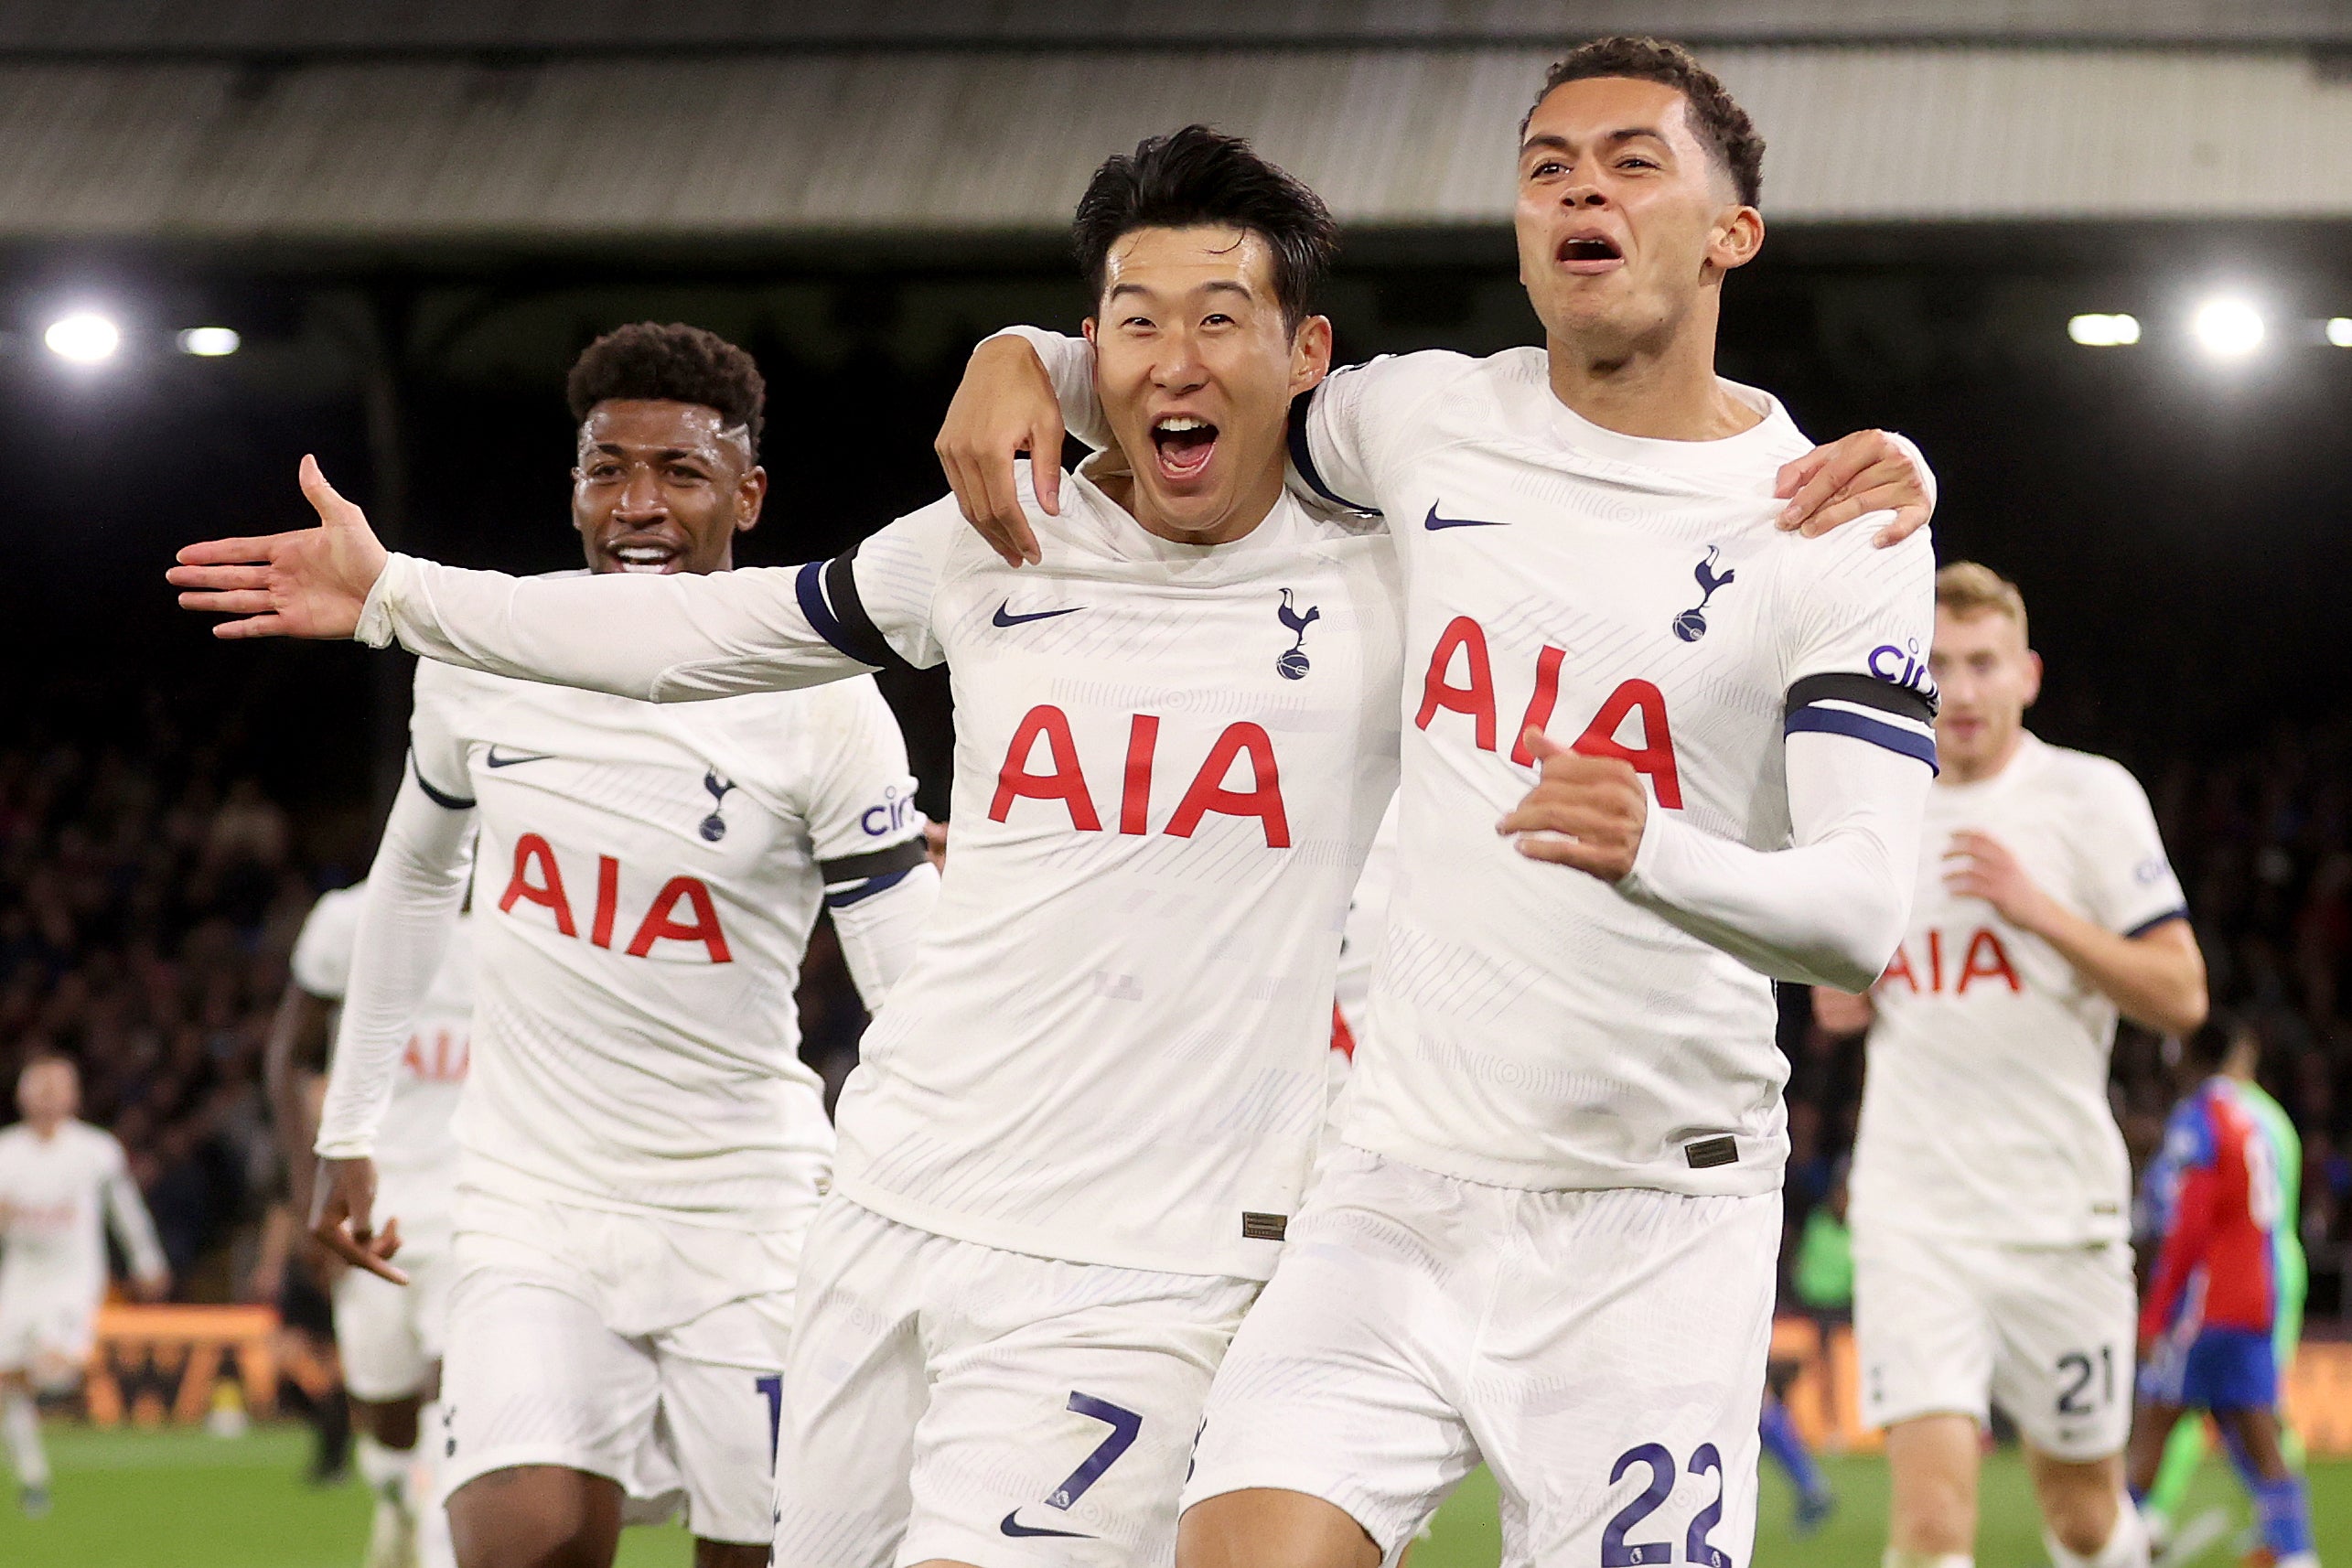 Formula 1 and Tottenham Hotspur FC join forces to find the next